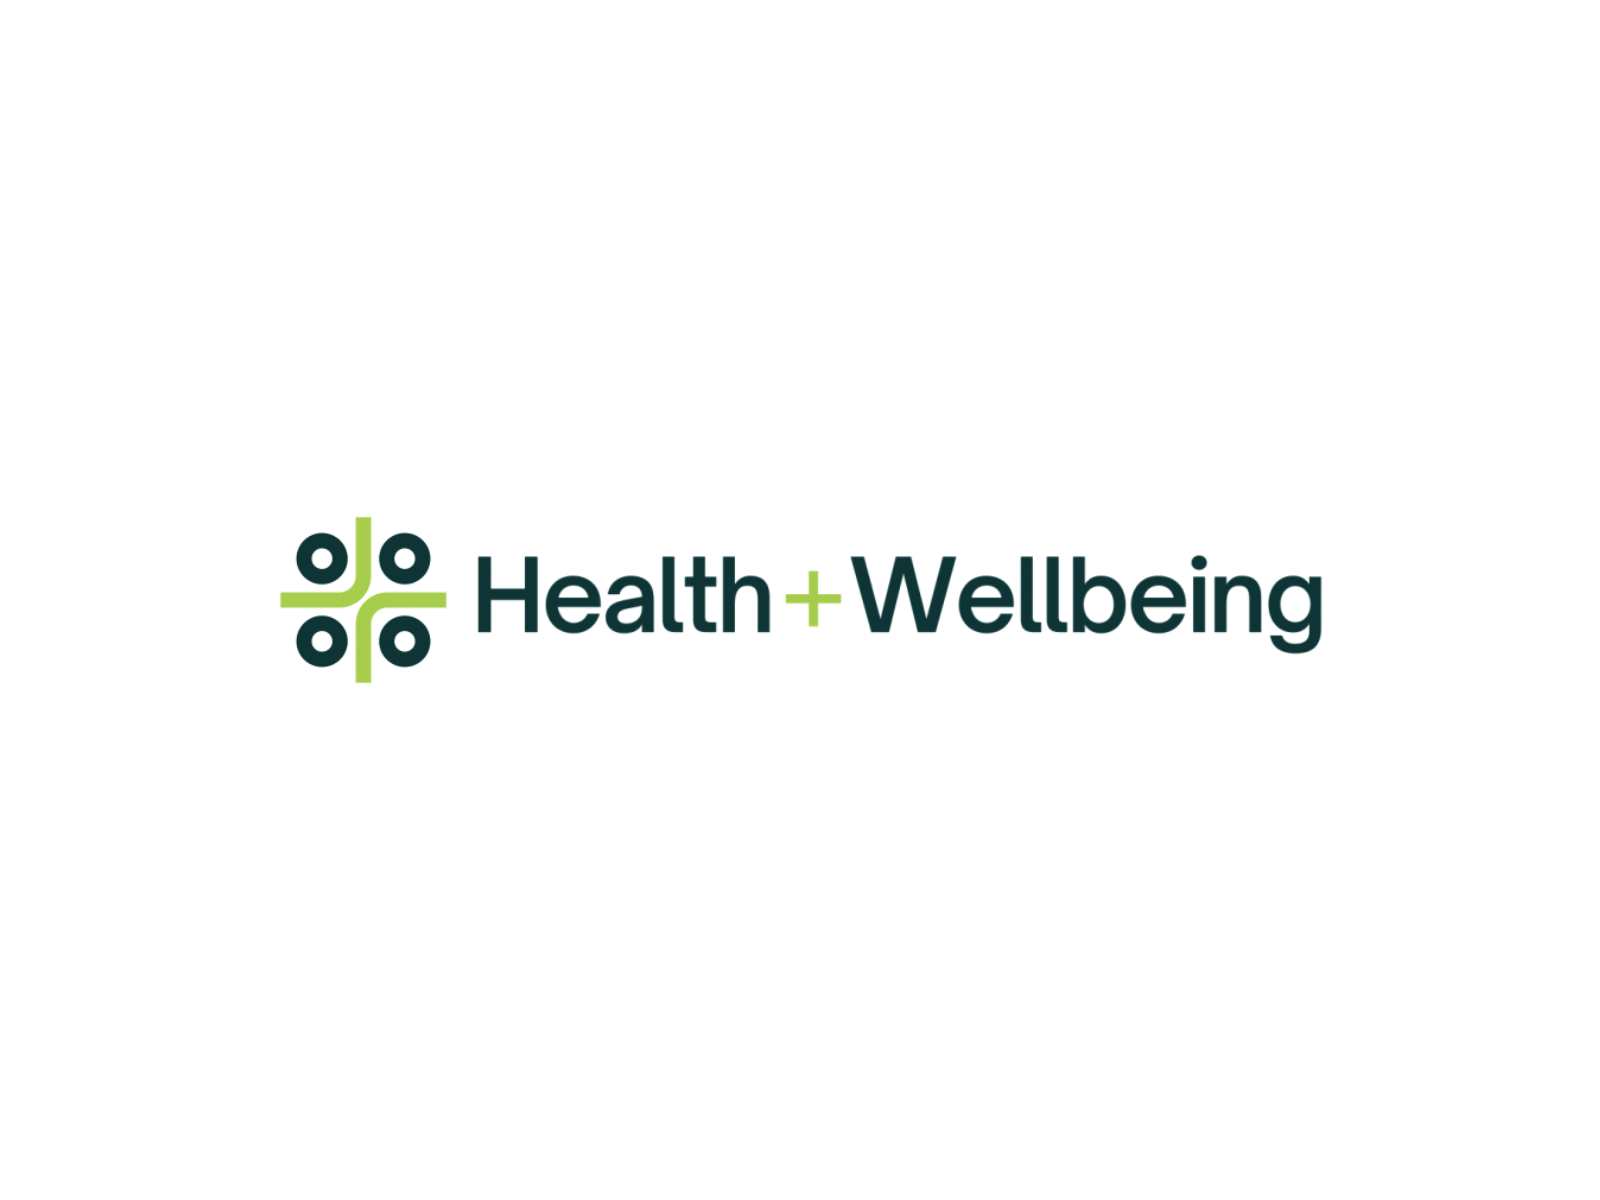 Health + Wellbeing Logo Animation by Paul Gernale on Dribbble